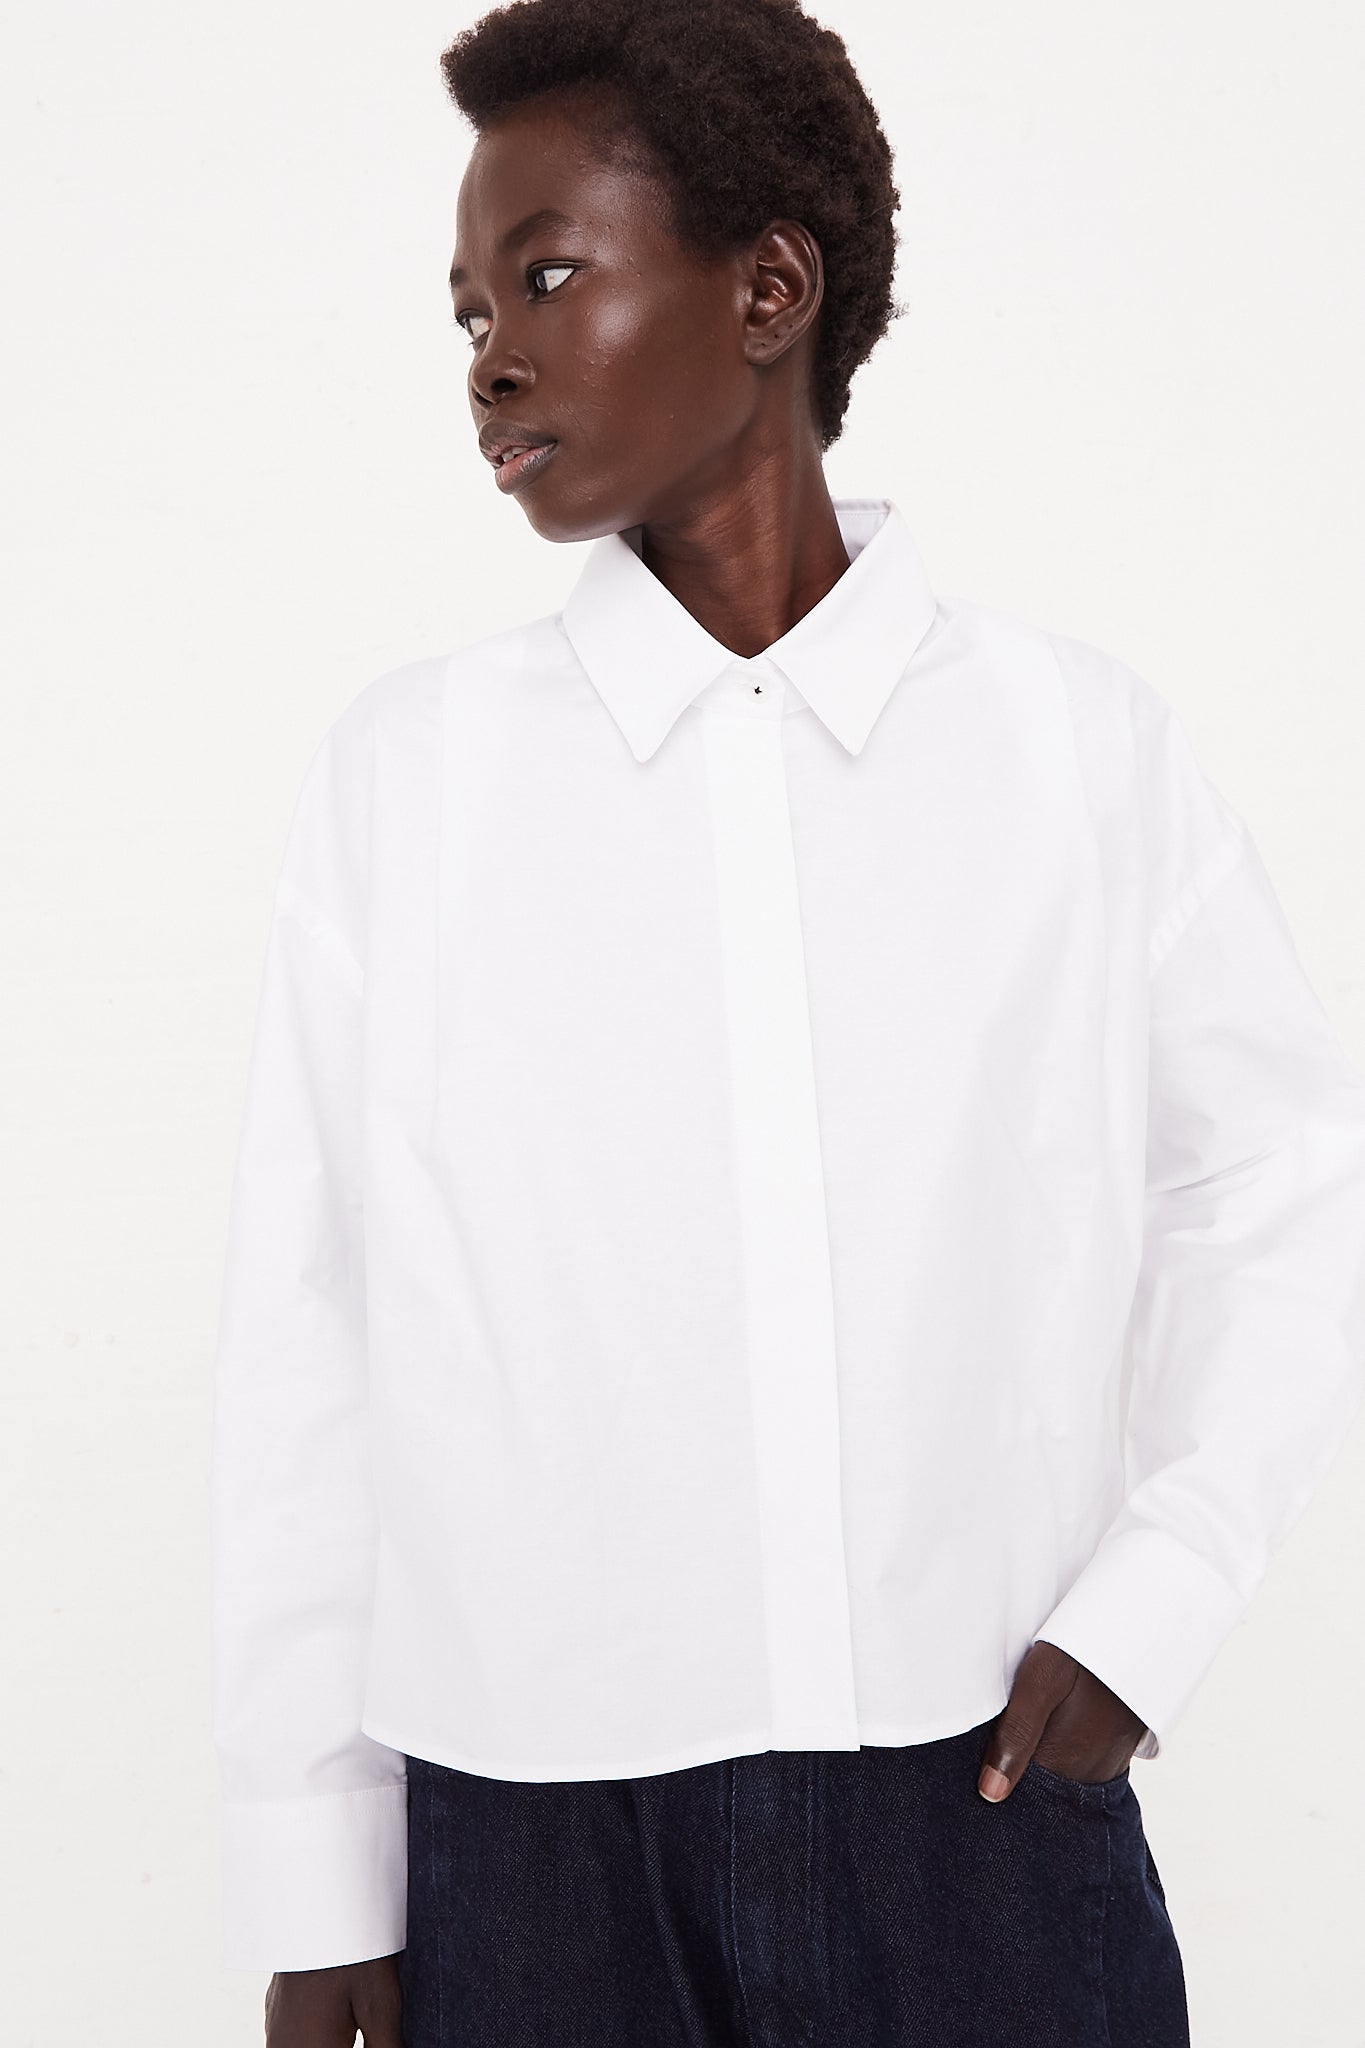 CORDERA Long Sleeve Shirt in White | Oroboro Store | Front view upclose on model